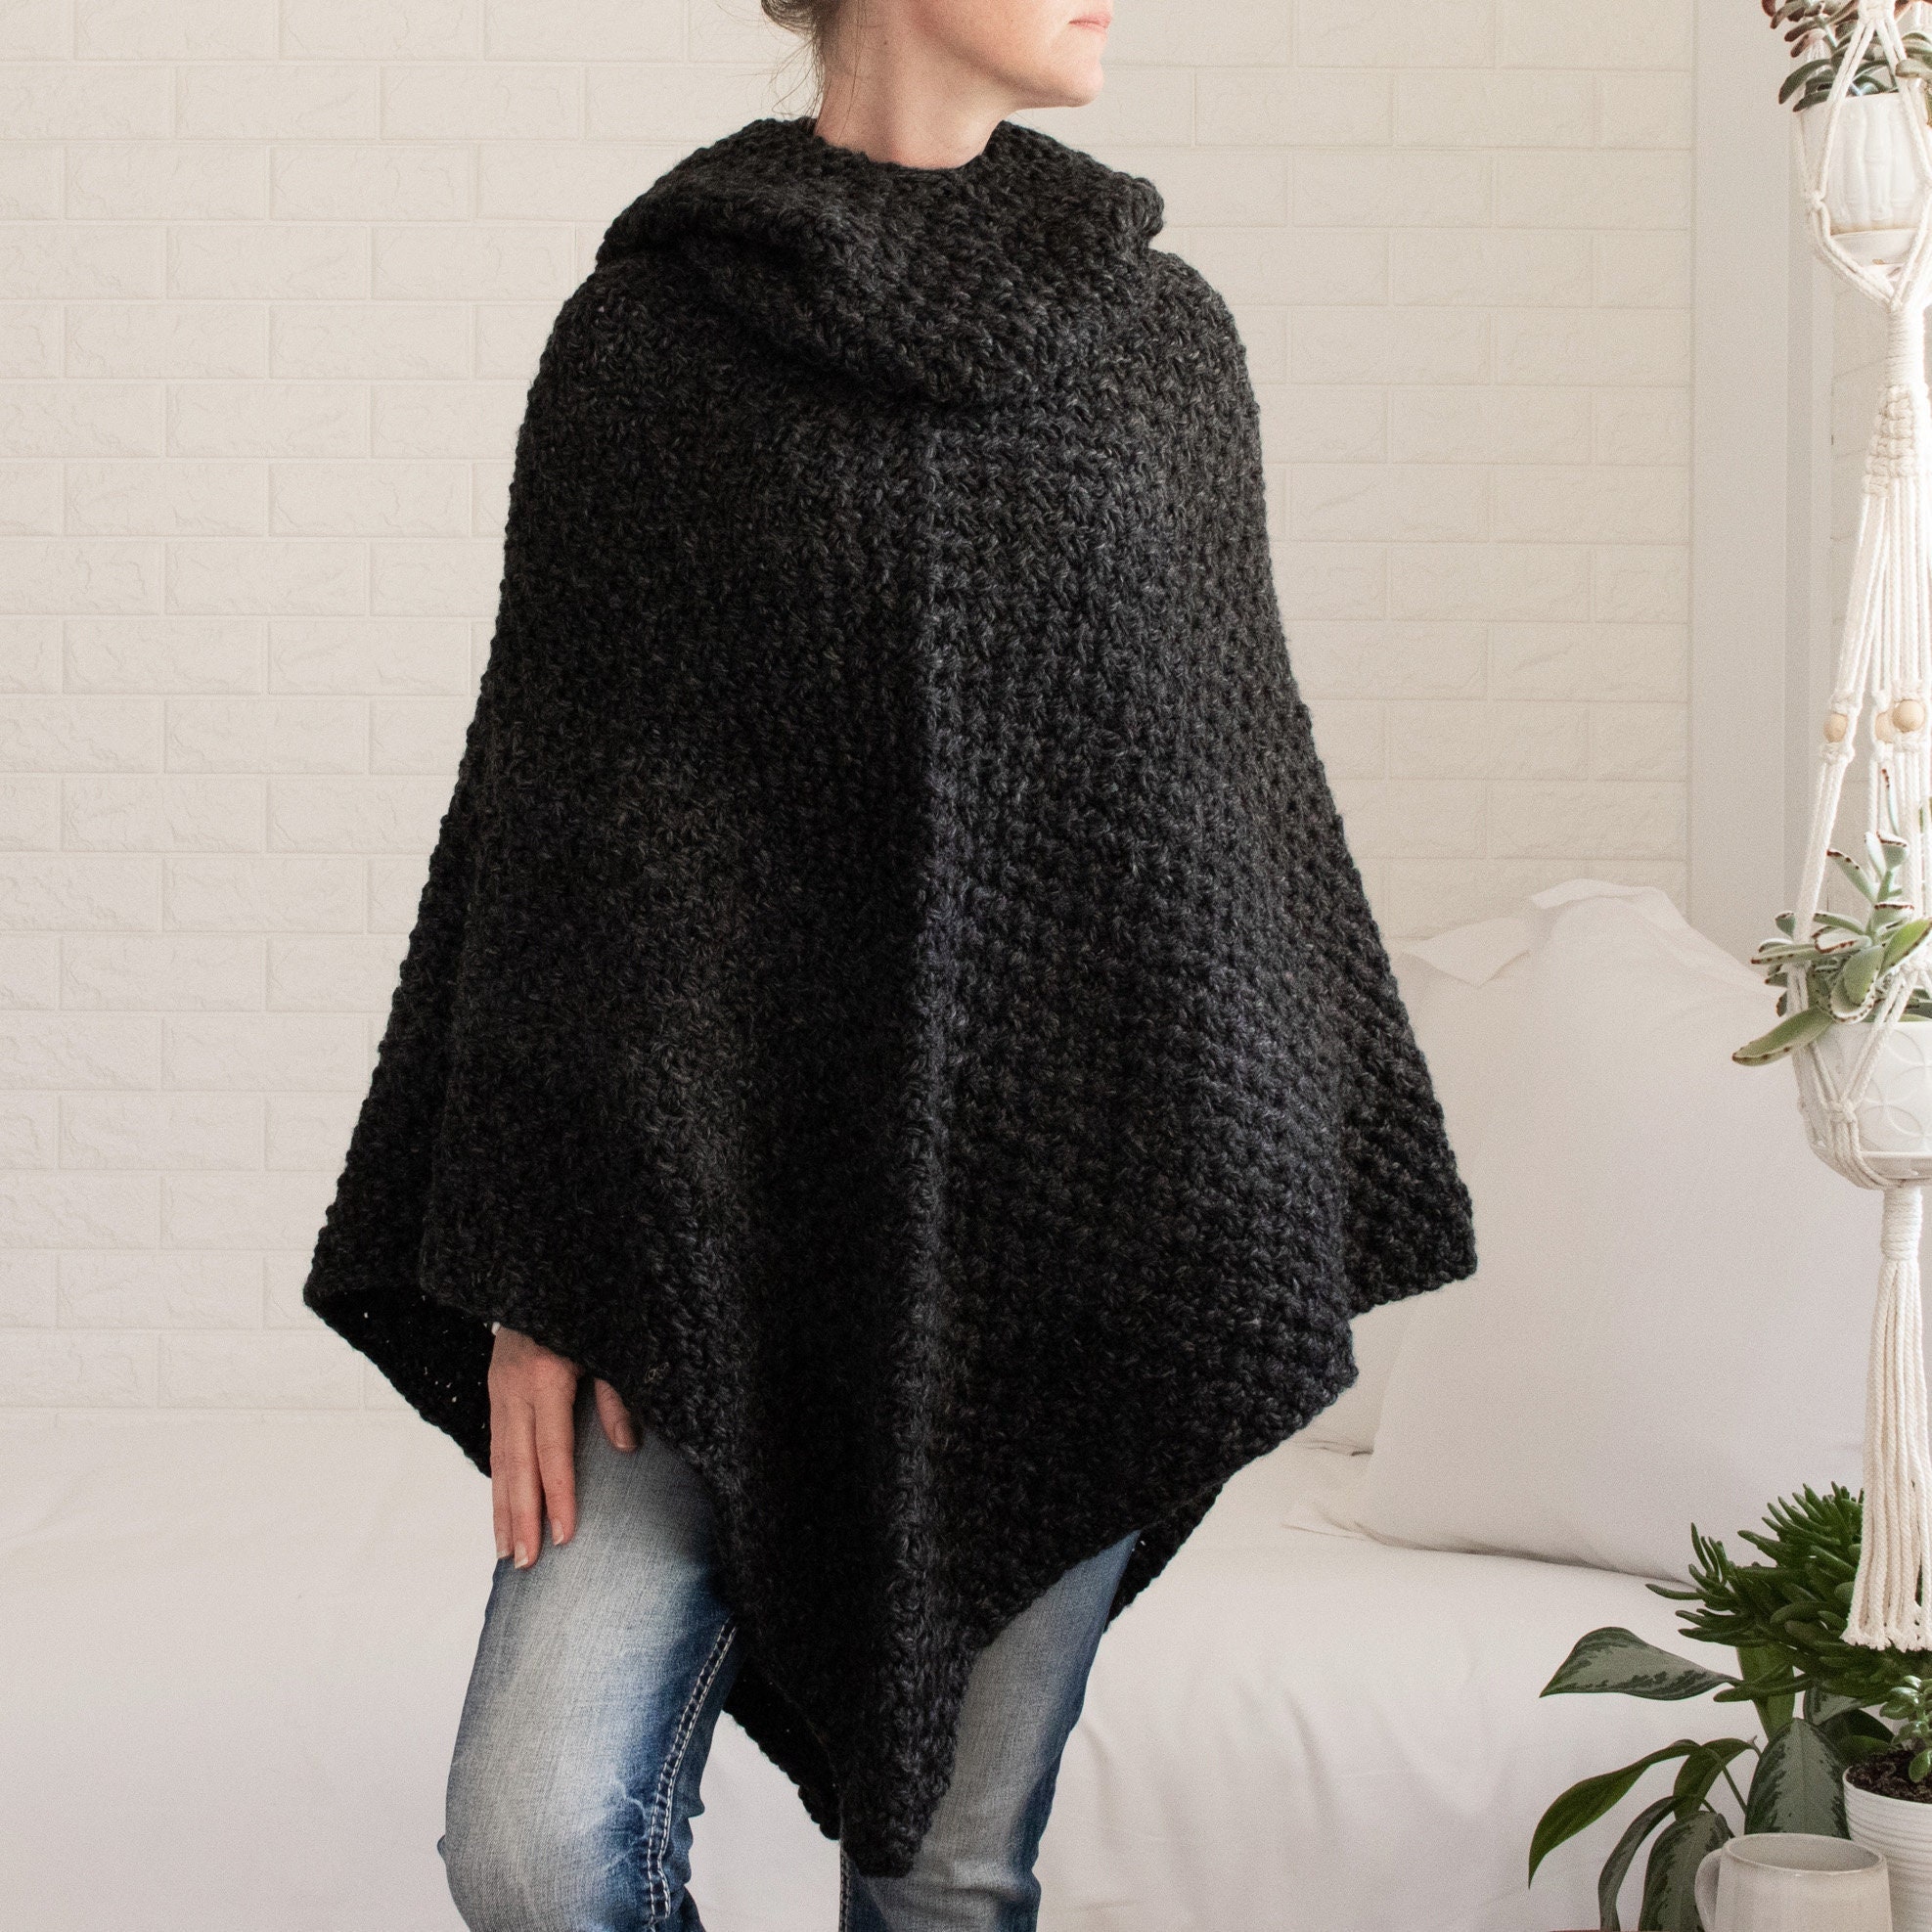 Poncho Knitting Pattern With Hood Knit Pull Over Knit Jacket Knit